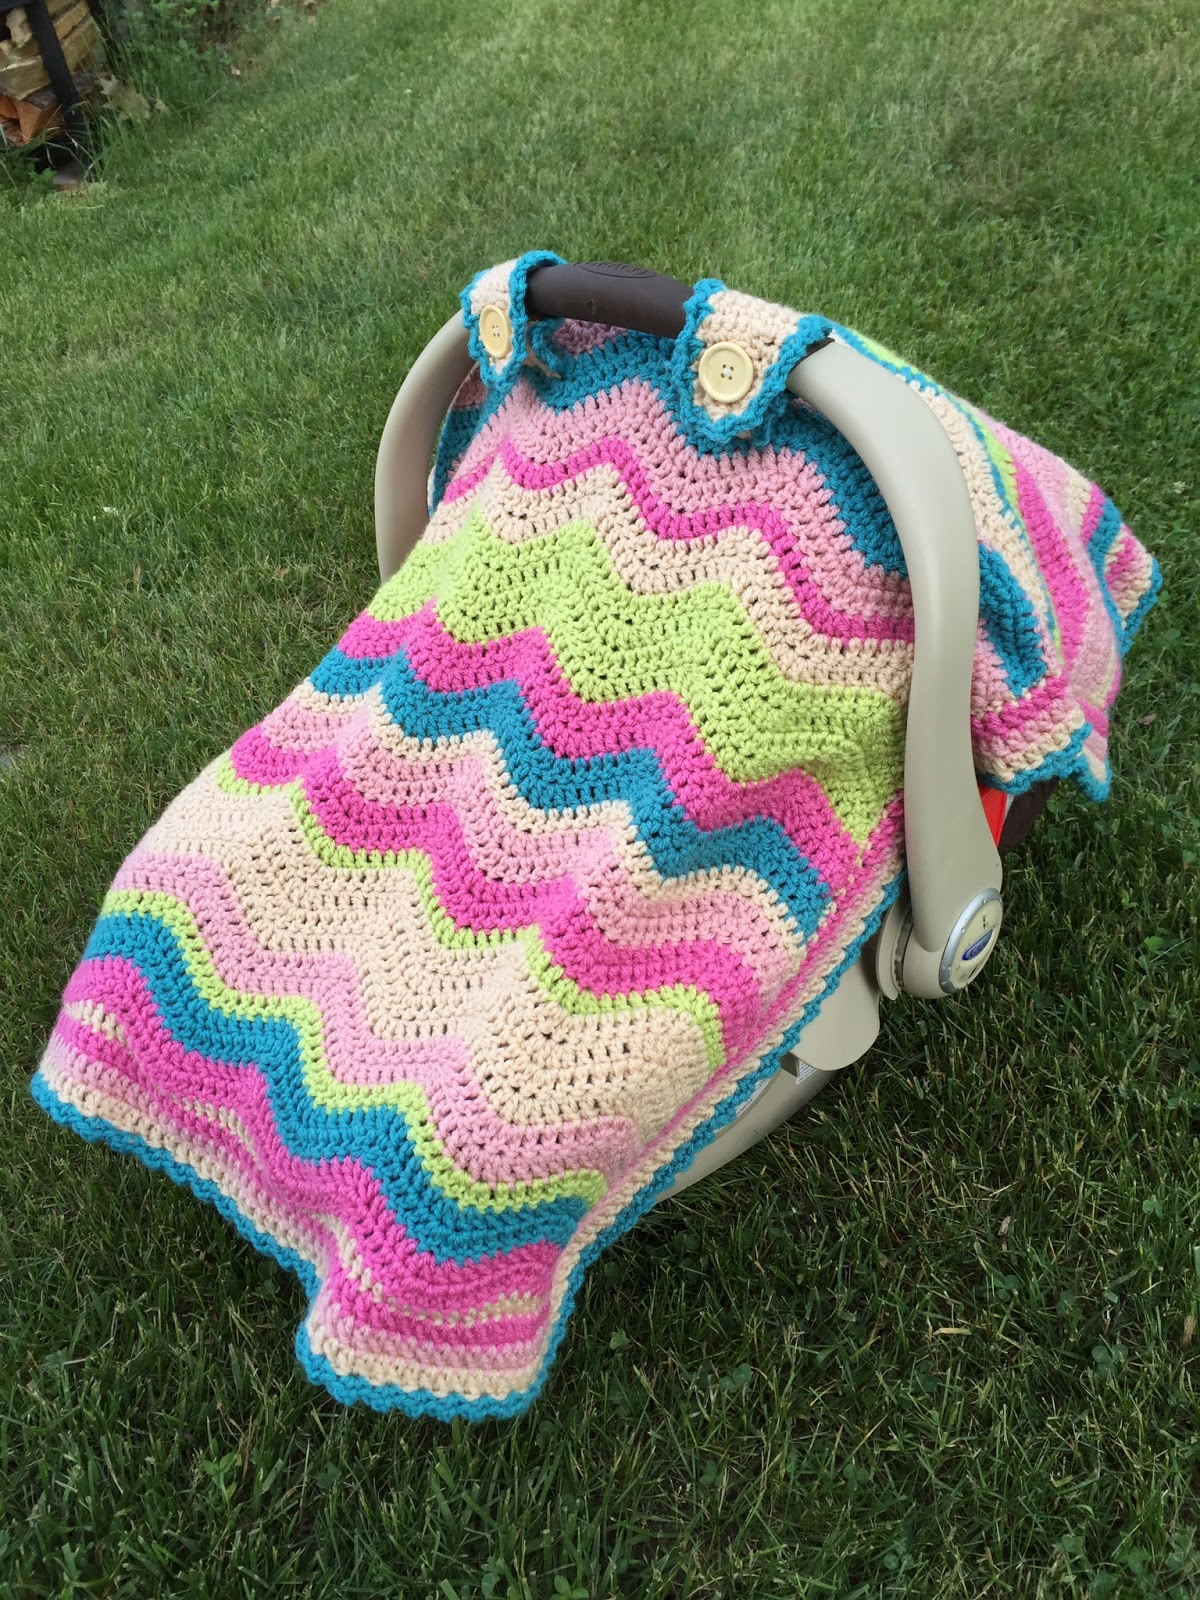 Car Seat Knitted Blanket Pattern Skein And Hook Free Crochet Pattern Emerson Car Seat Cover Or Ba